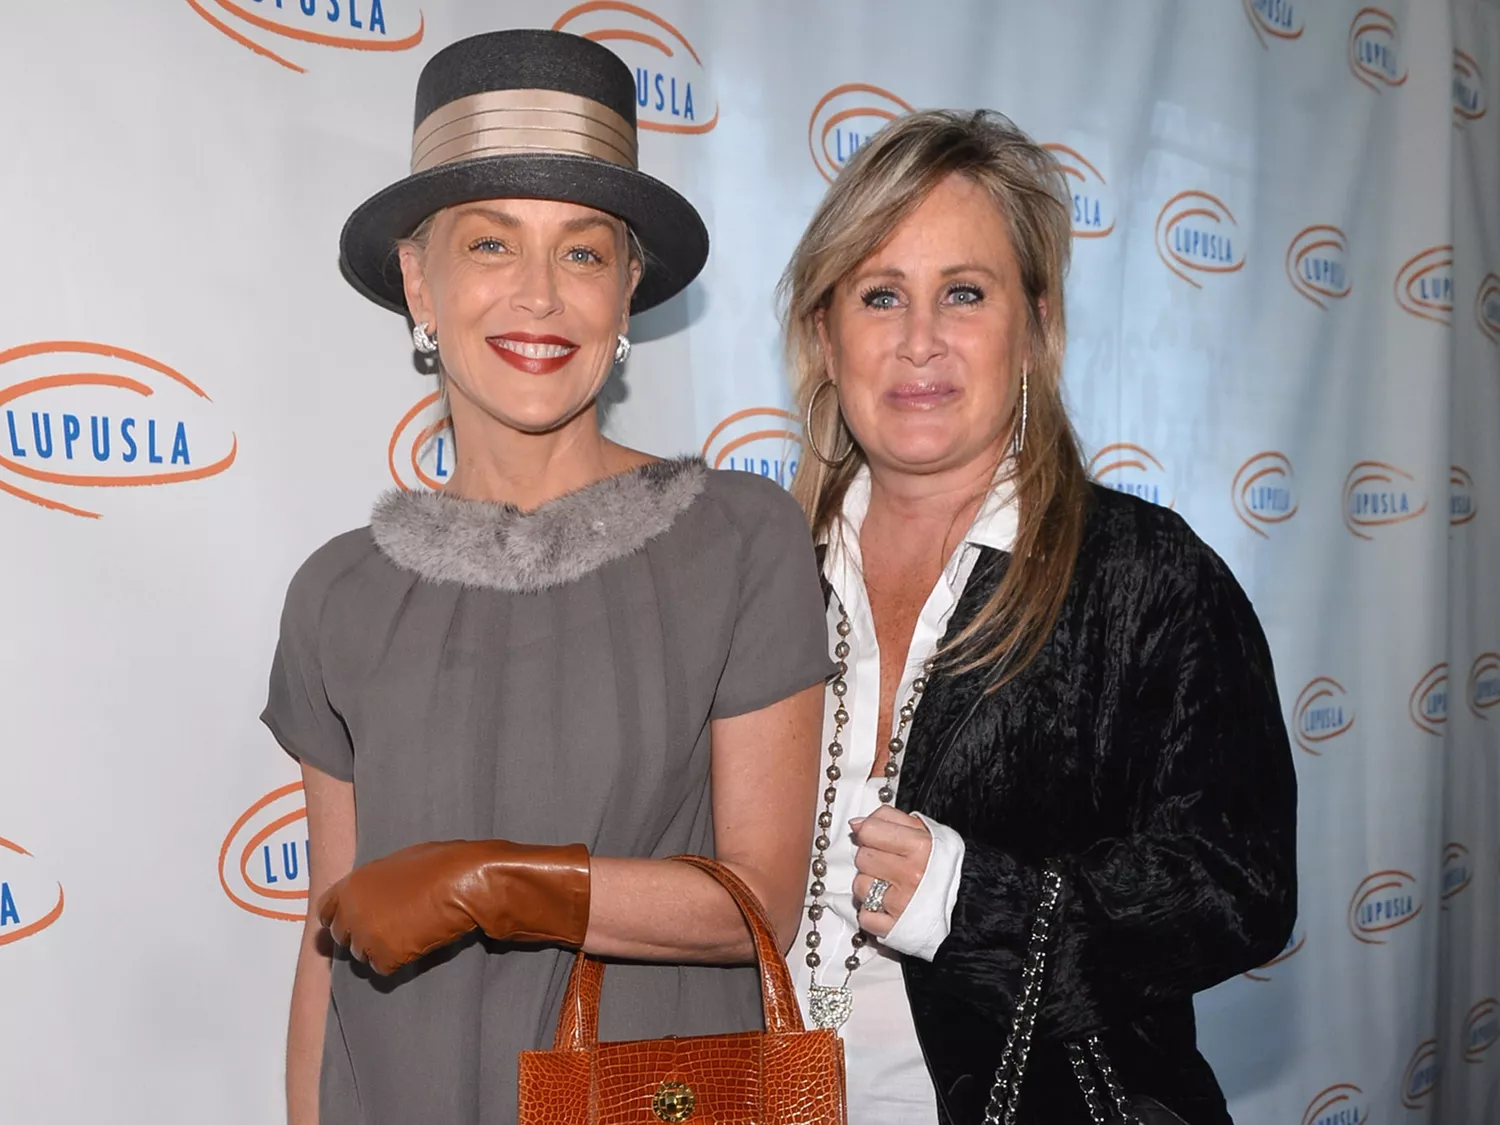 Sharon Stone and sister Kelly Stone arrive to the Lupus LA 10th Anniversary Hollywood Bag Ladies Luncheon on November 1, 2012. 